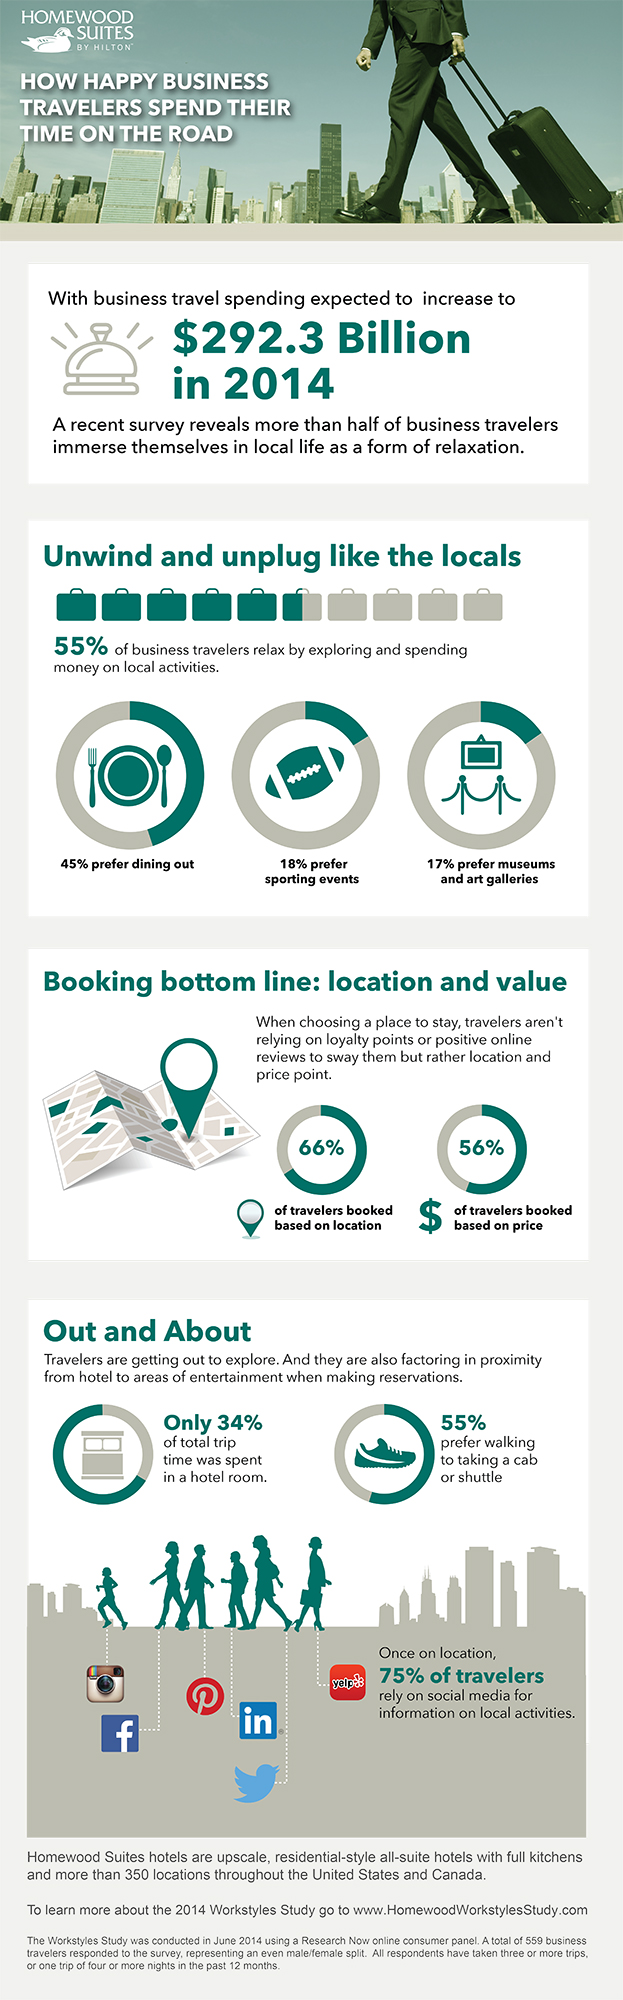 Homewood Suites’ Workstyles Study reveals how biz travelers live when away from home, specifically examining how America’s workforce immerses themselves in the local fabric of their destinations.